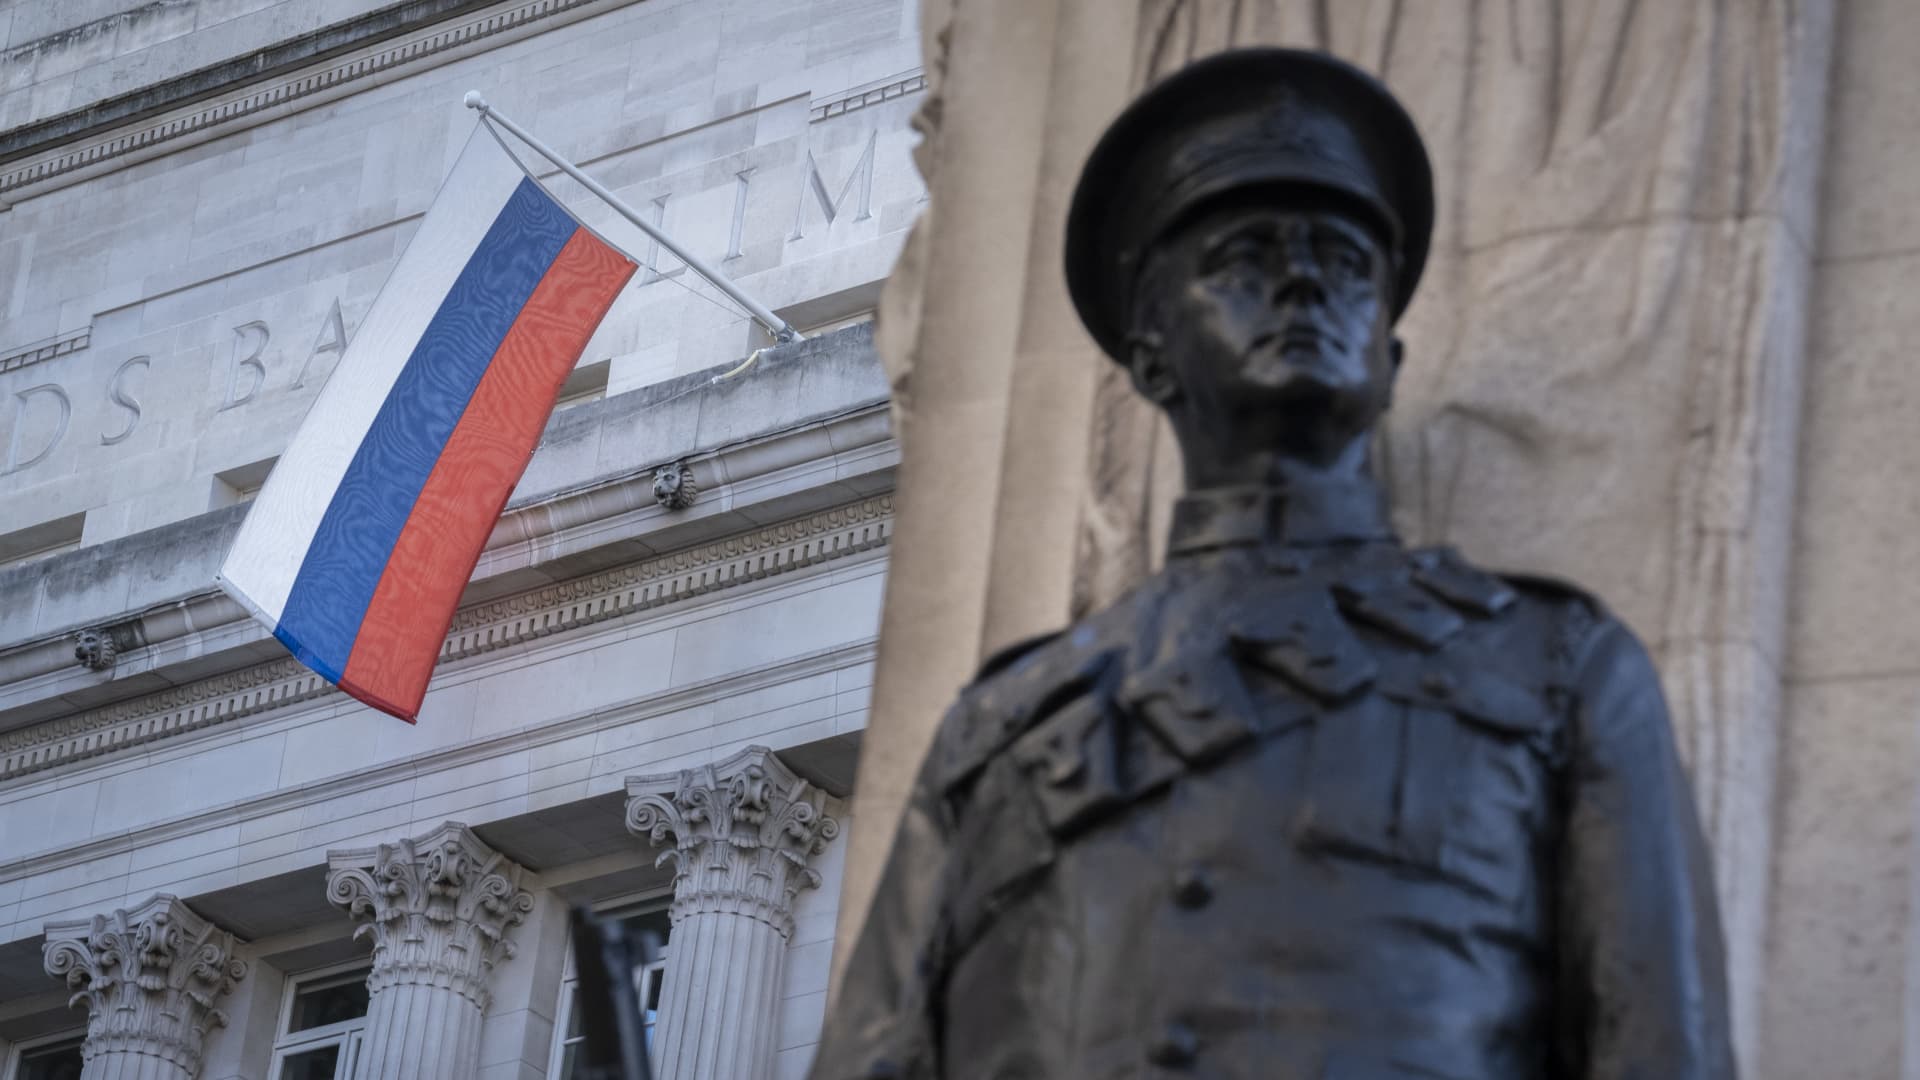 The Russian flag hangs from Russian Federation and Russian investment Bank VTB Capital, above the war memorial to WW1 British war dead.